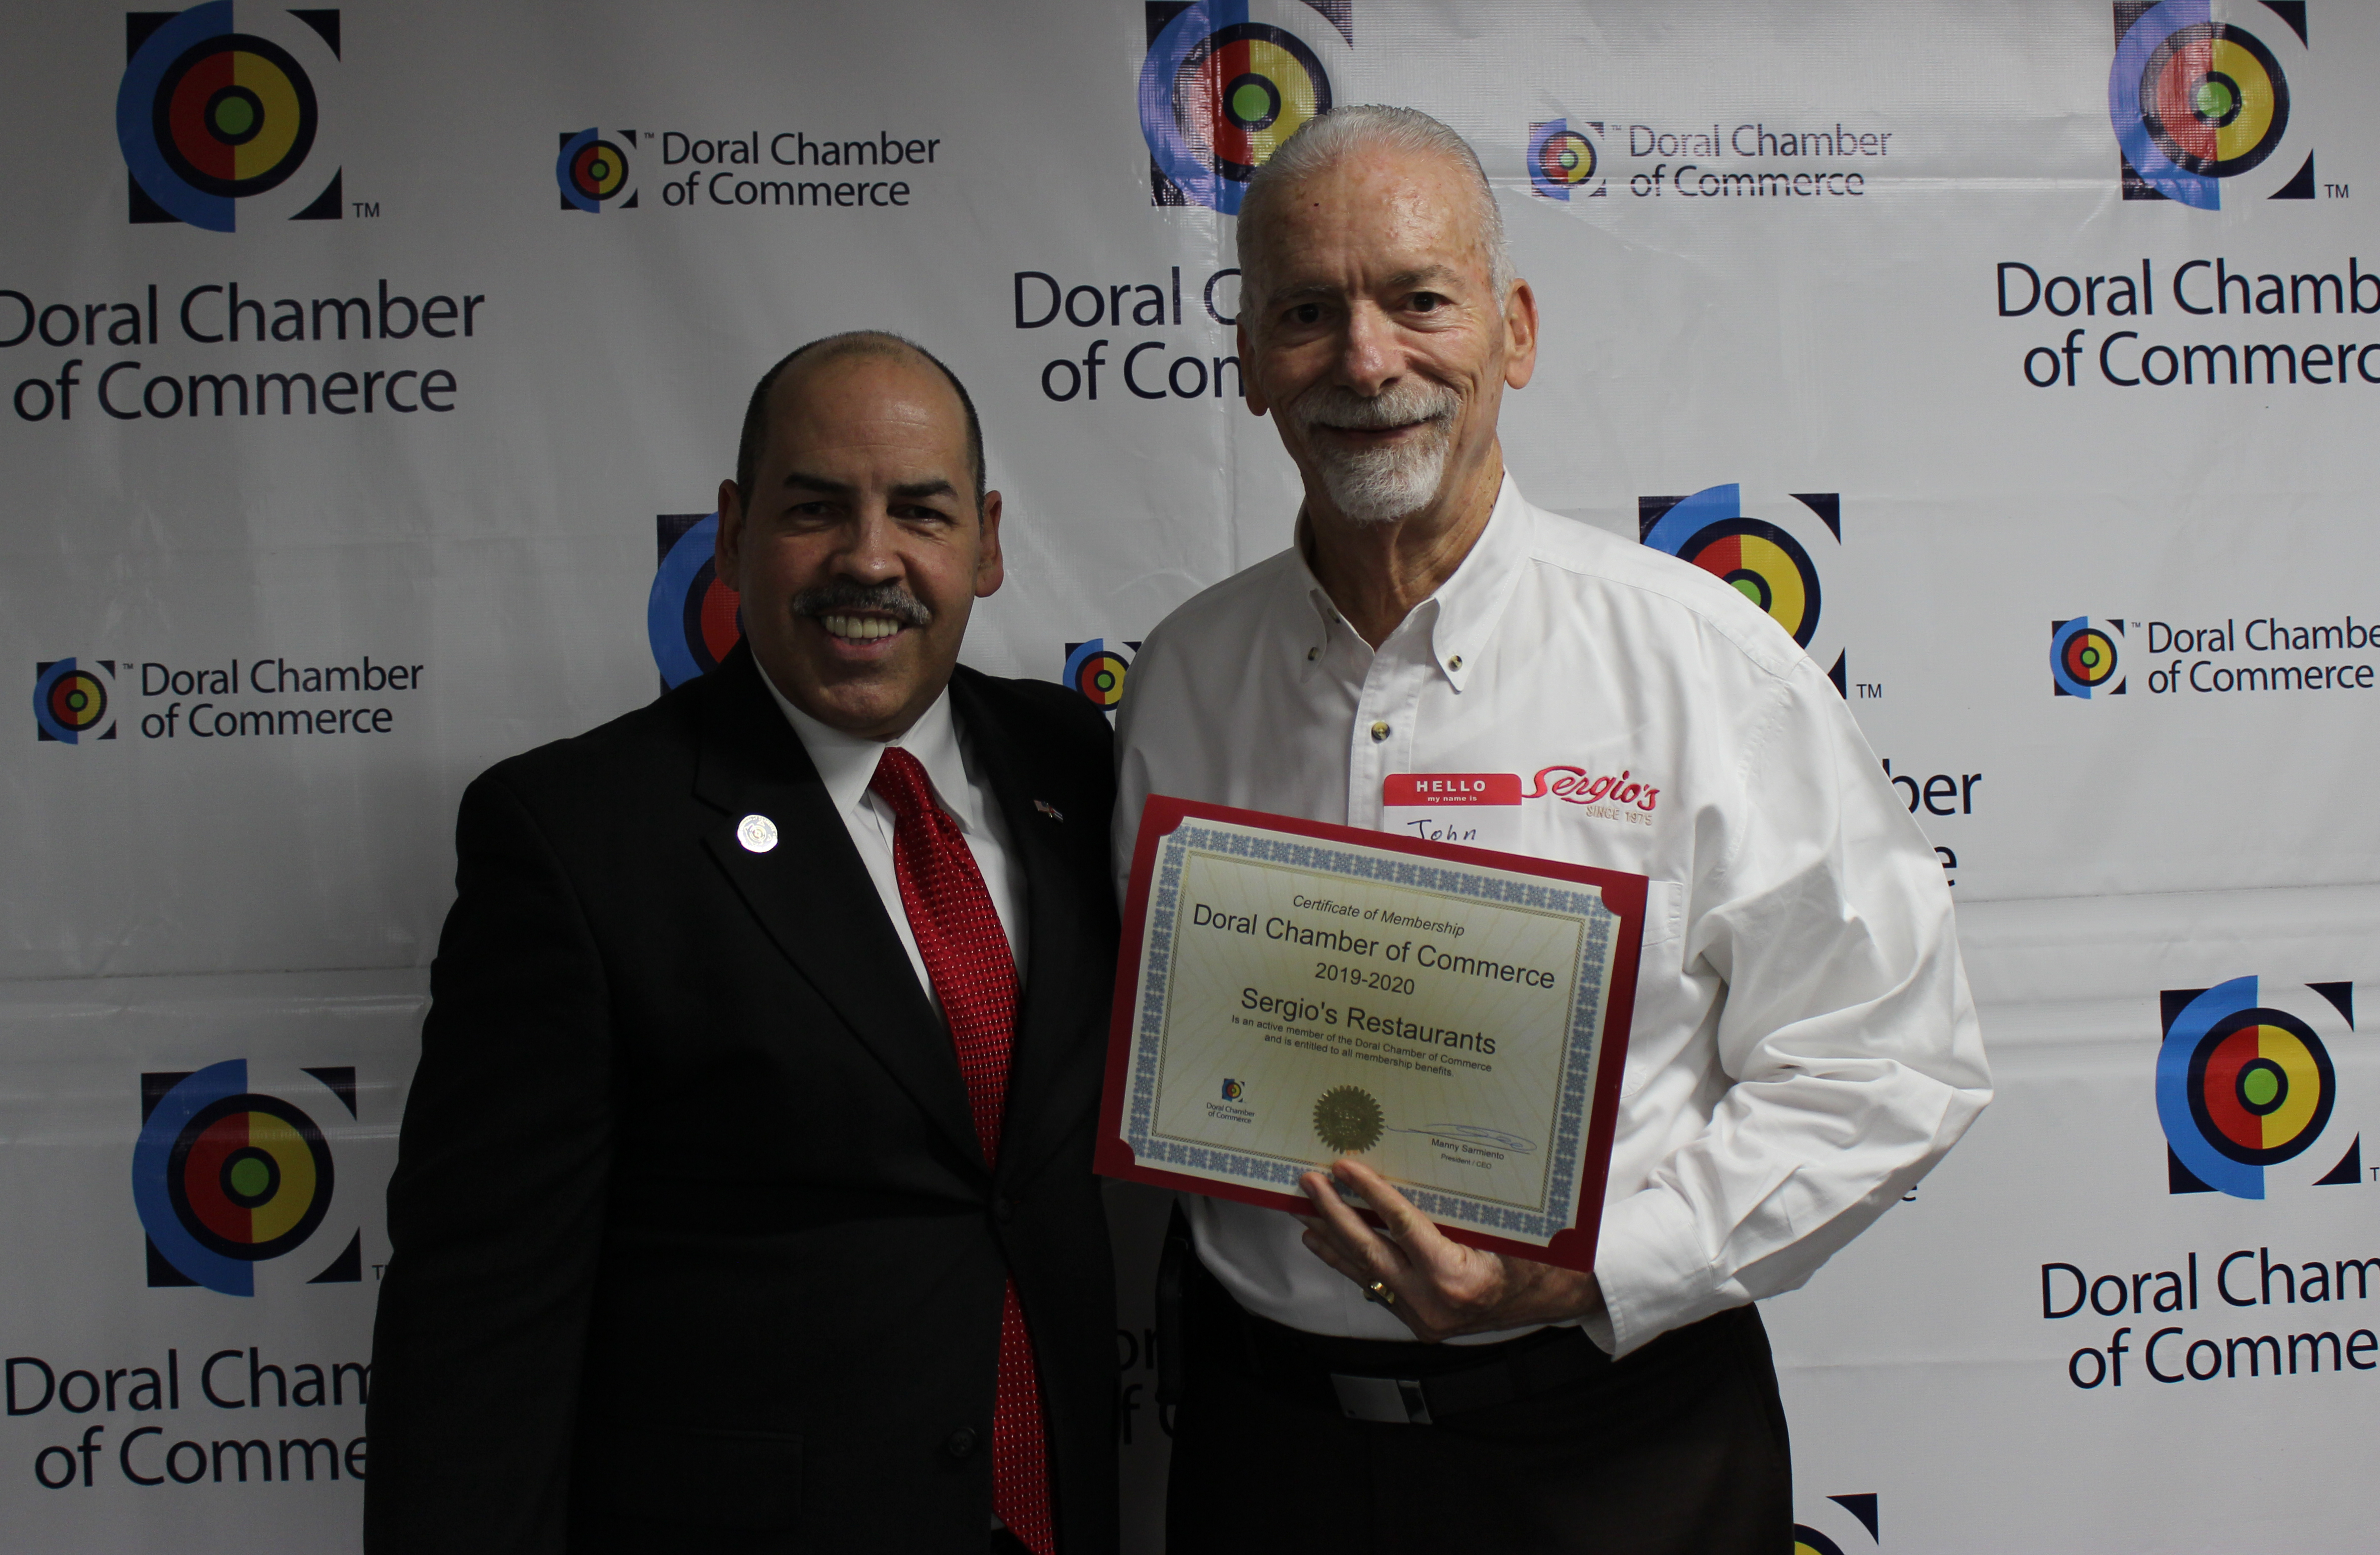 Doral Chamber of Commerce introduces Circle of Success event, Sergios owner being given an award by Manny Sarmiento.